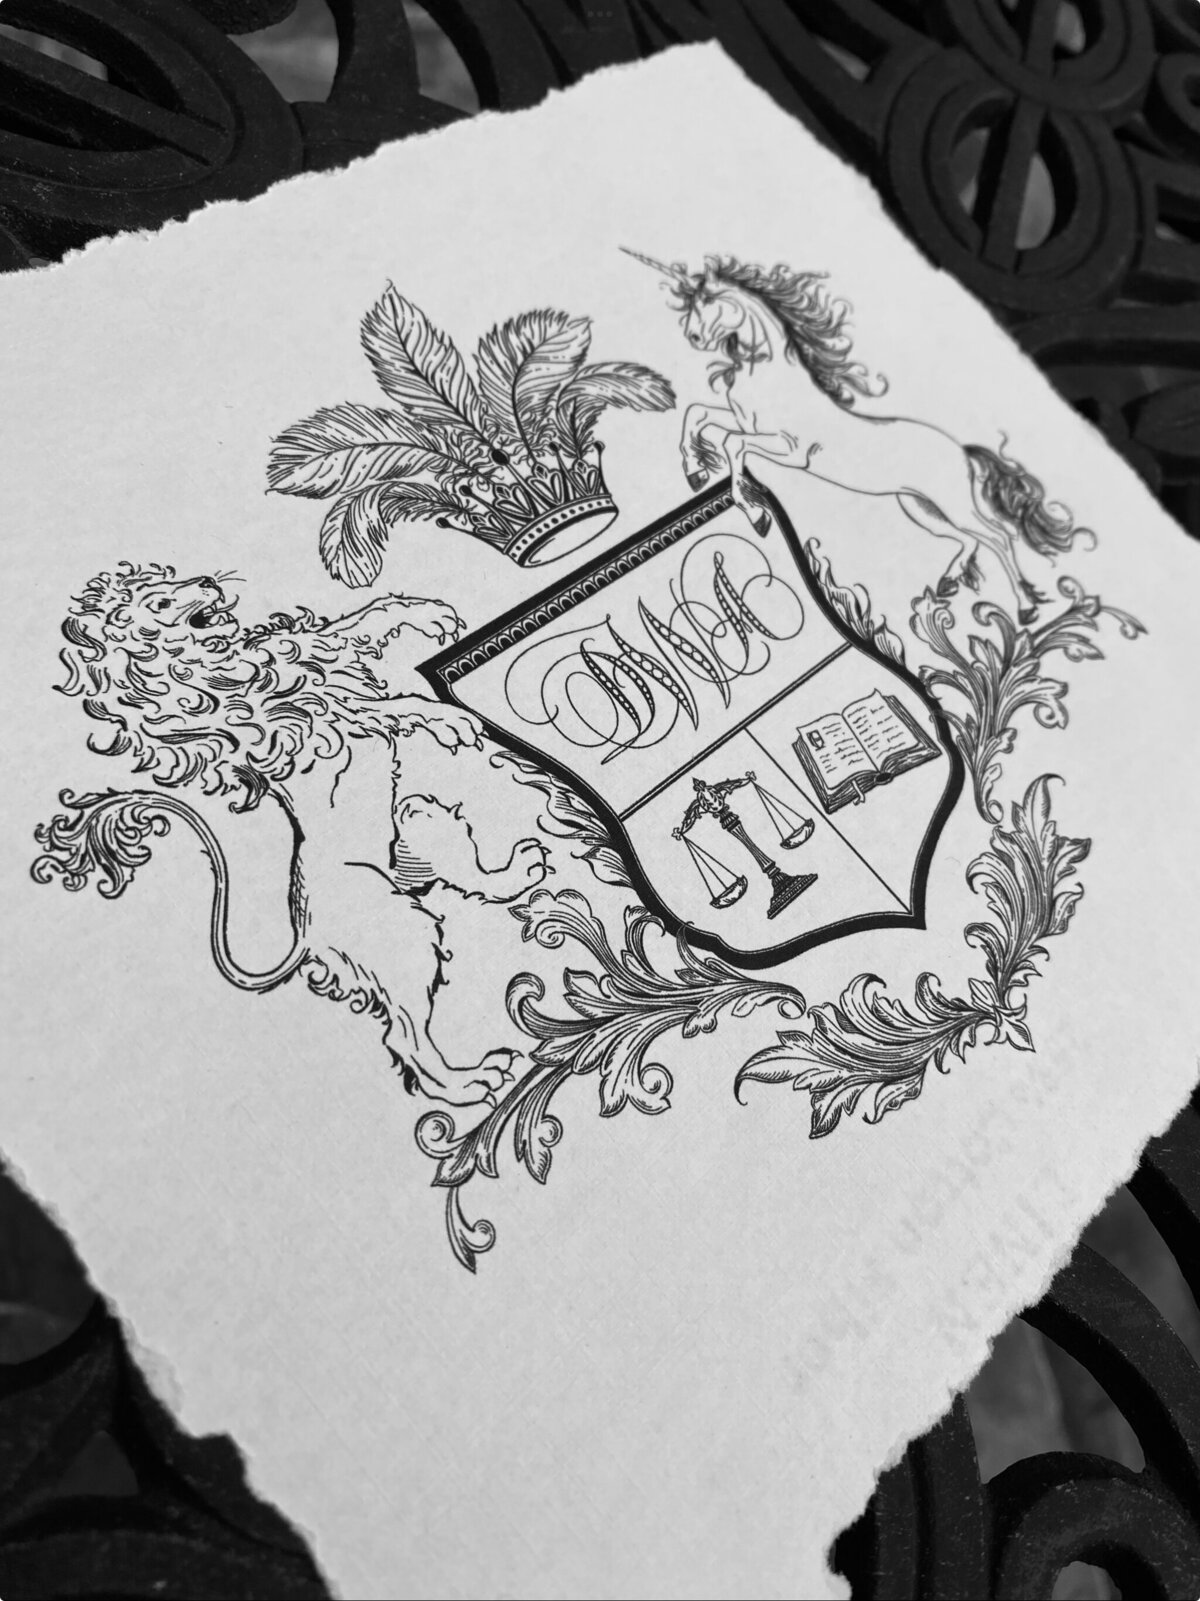 custom crest design calligraphy by Scribble Savvy from Washington DC